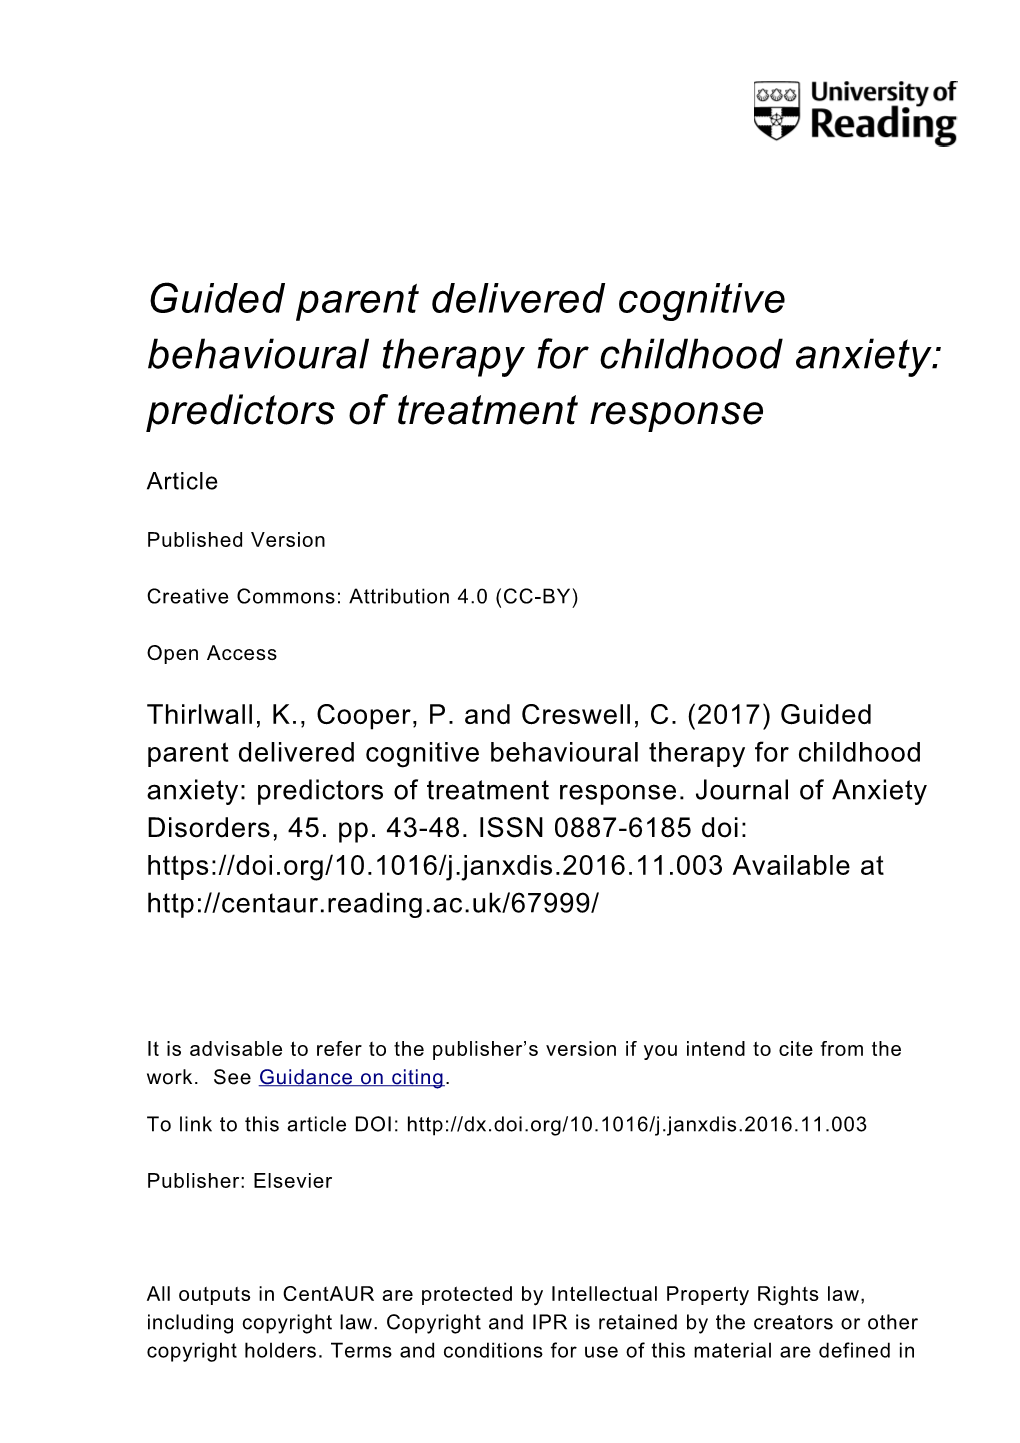 Guided Parent-Delivered Cognitive Behavioral Therapy for Childhood